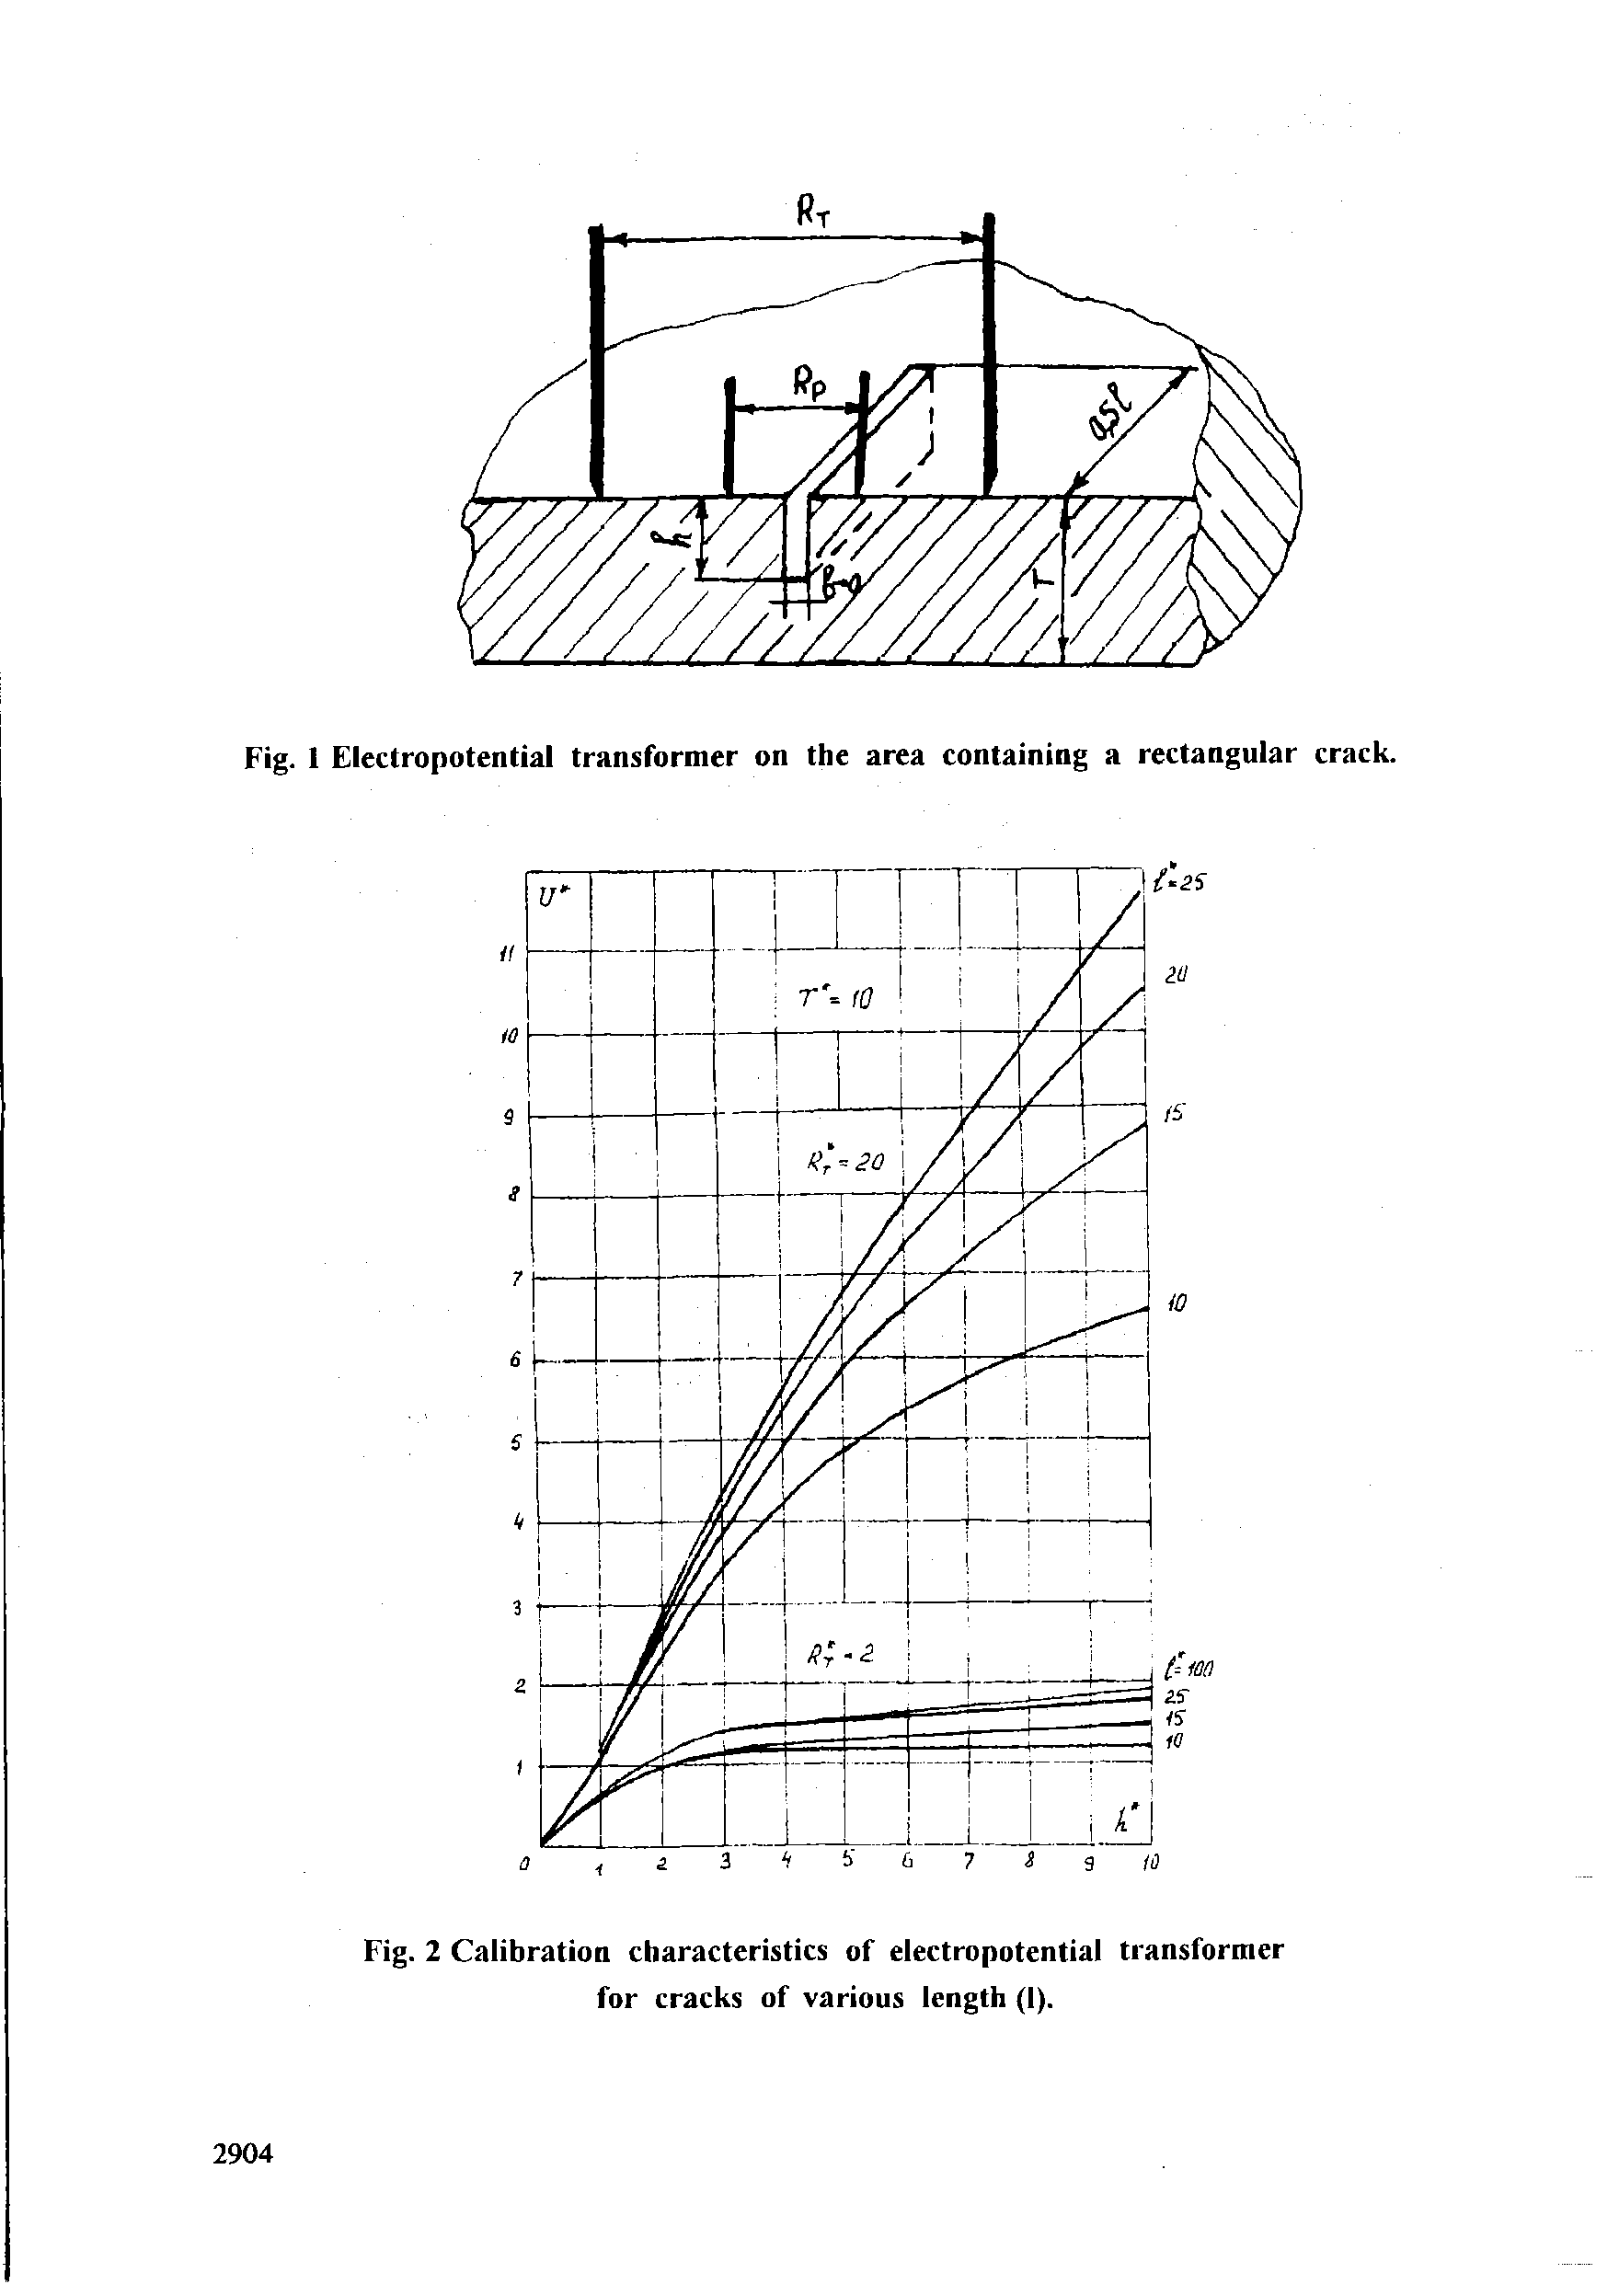 Fig. 2 Calibration characteristics of electropotential transformer for cracks of various length (I).